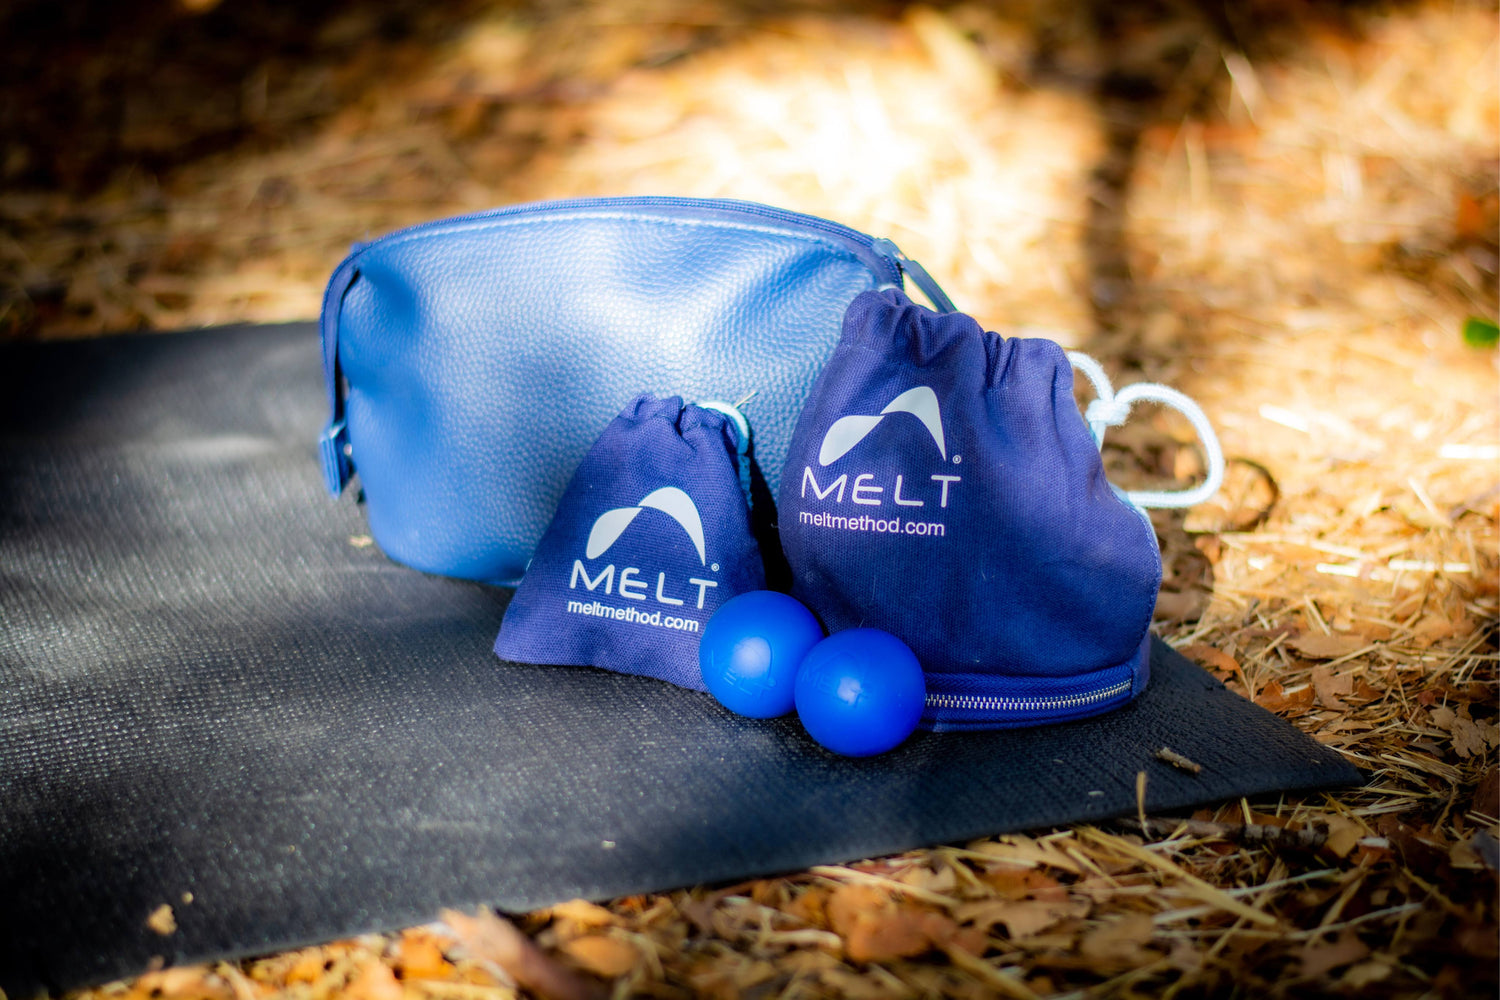 Melt Hand & Foot Therapy Ball Kit